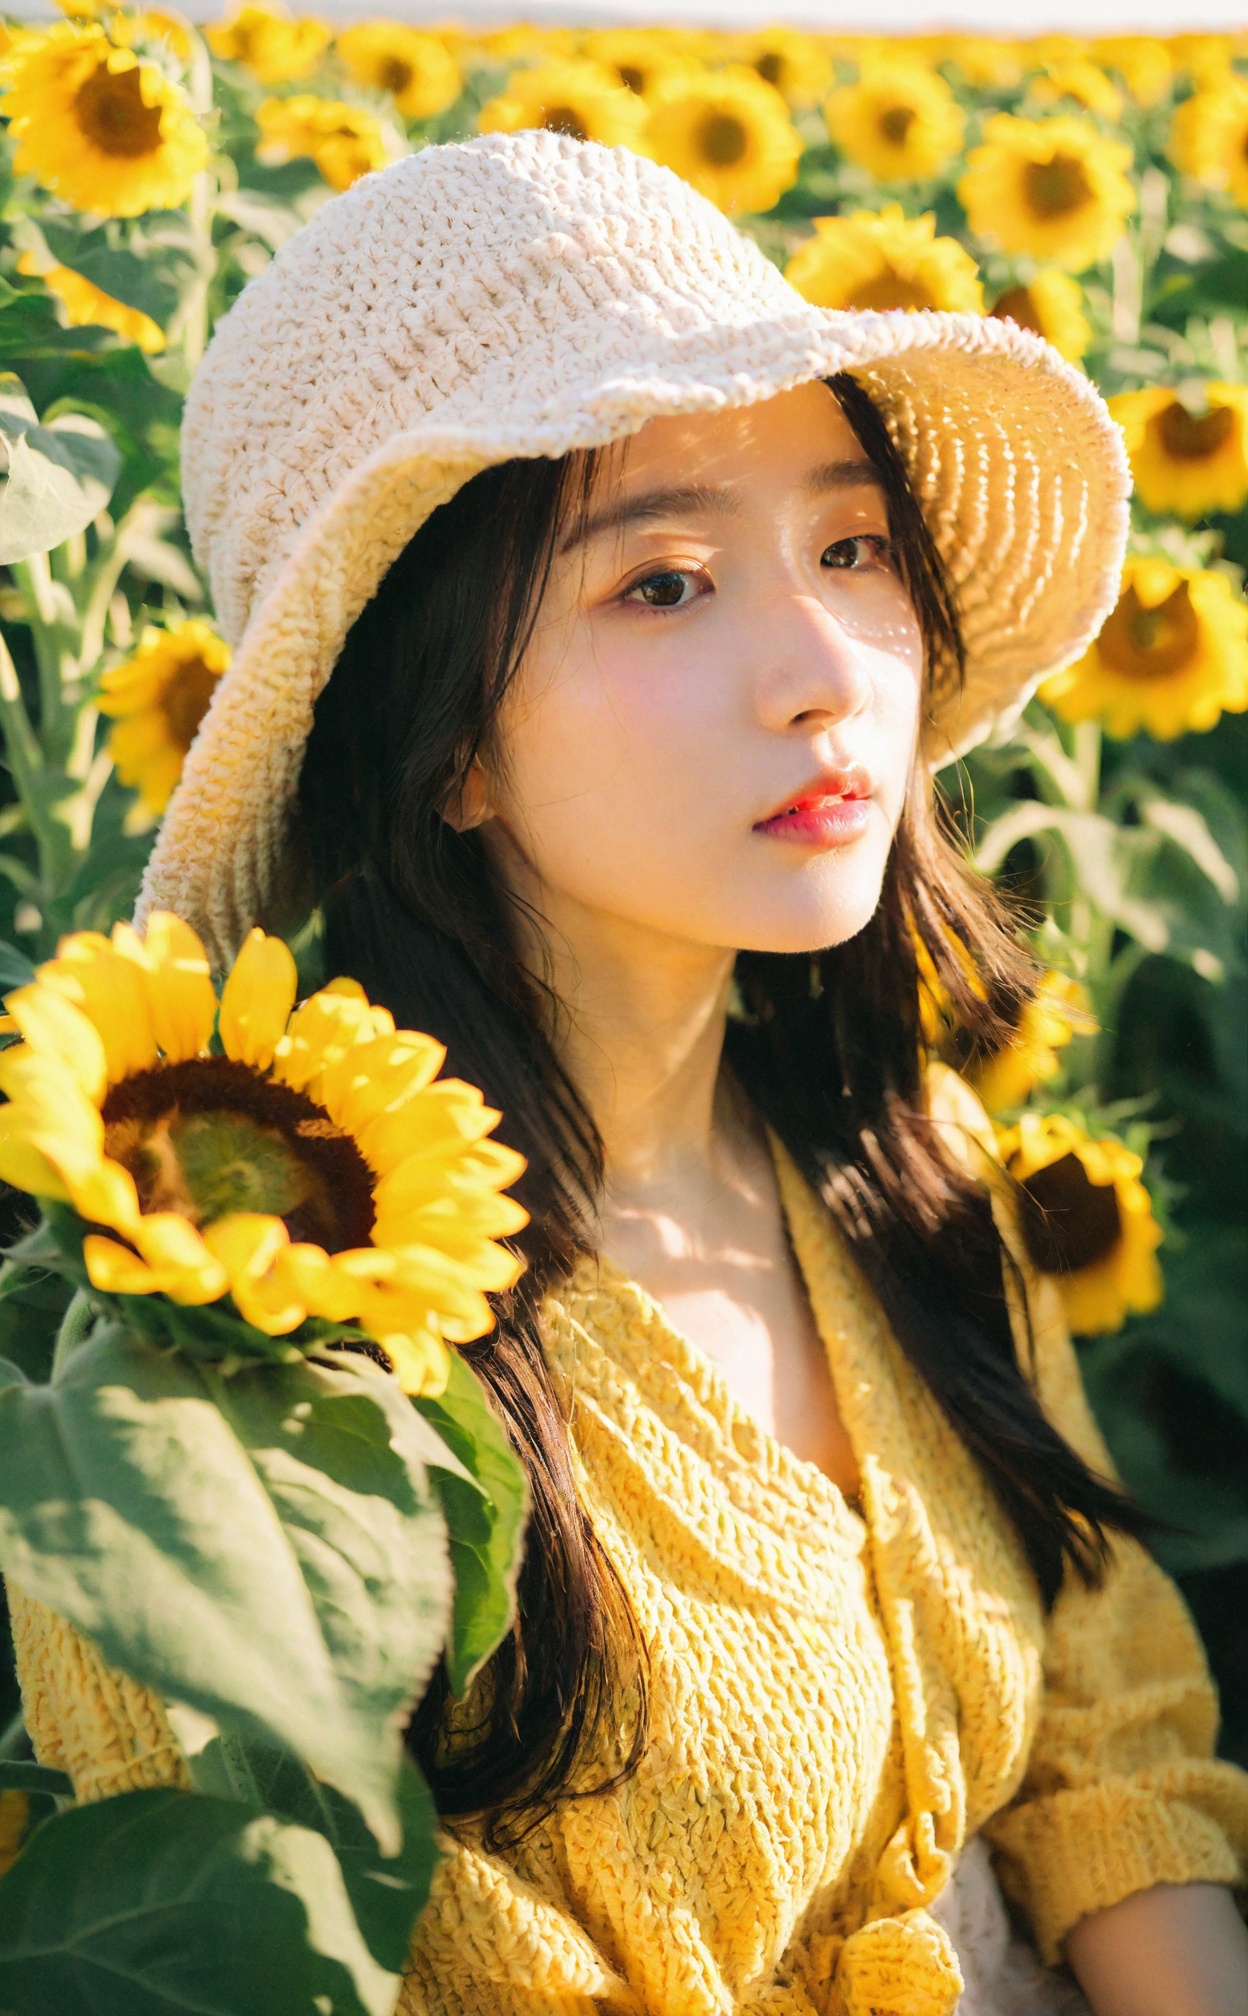 mugglelight, a girl with a sun hat, sitting in a field of sunflowers, bathed in the golden glow of sunset, warm hues, peaceful ambiance, natural beauty.korean girl,black hair,